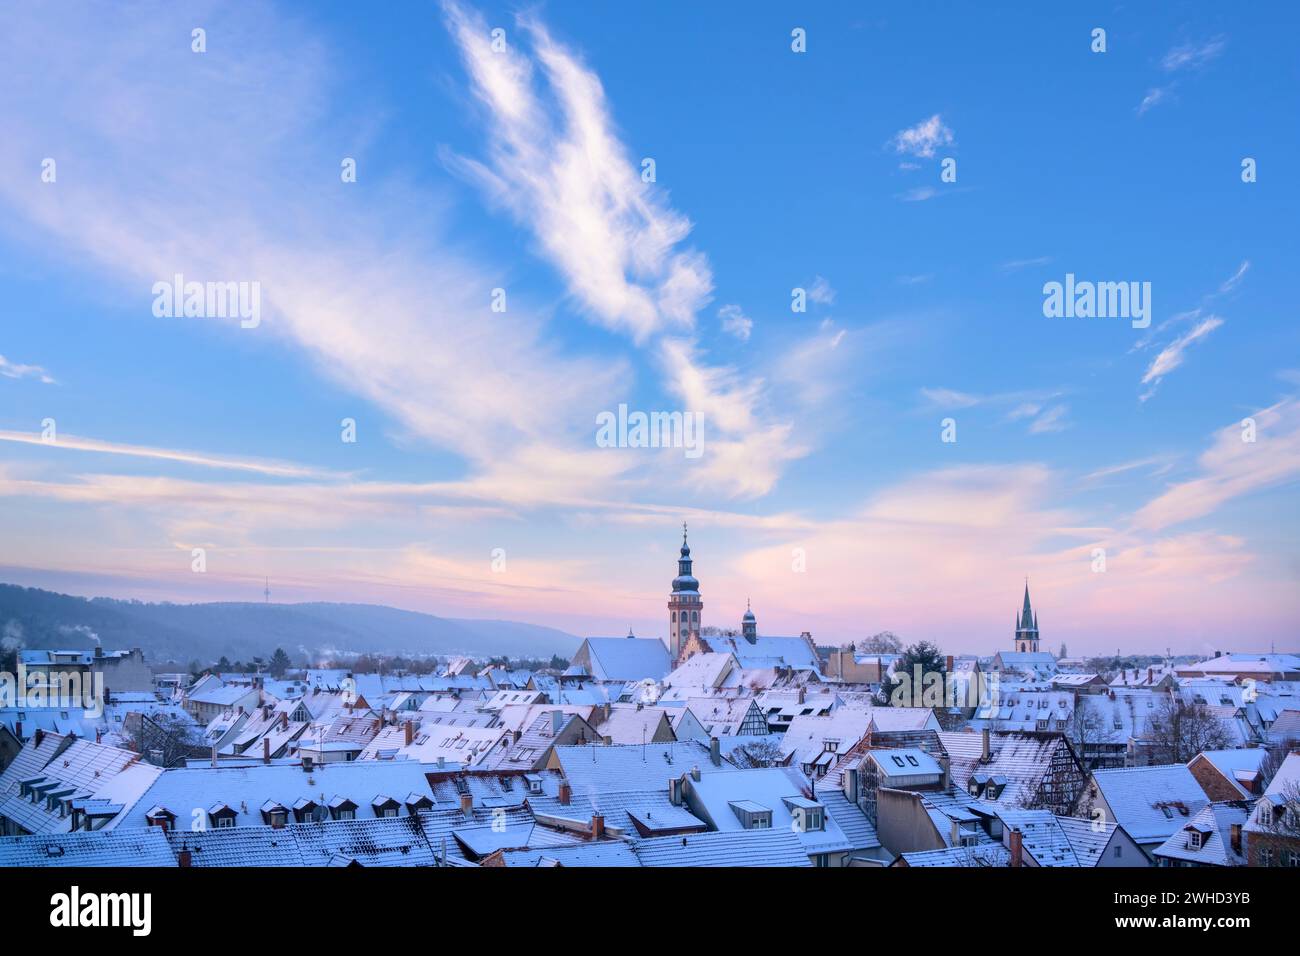 Germany, Baden-Württemberg, Karlsruhe, Durlach, View over the old town of Durlach Stock Photo